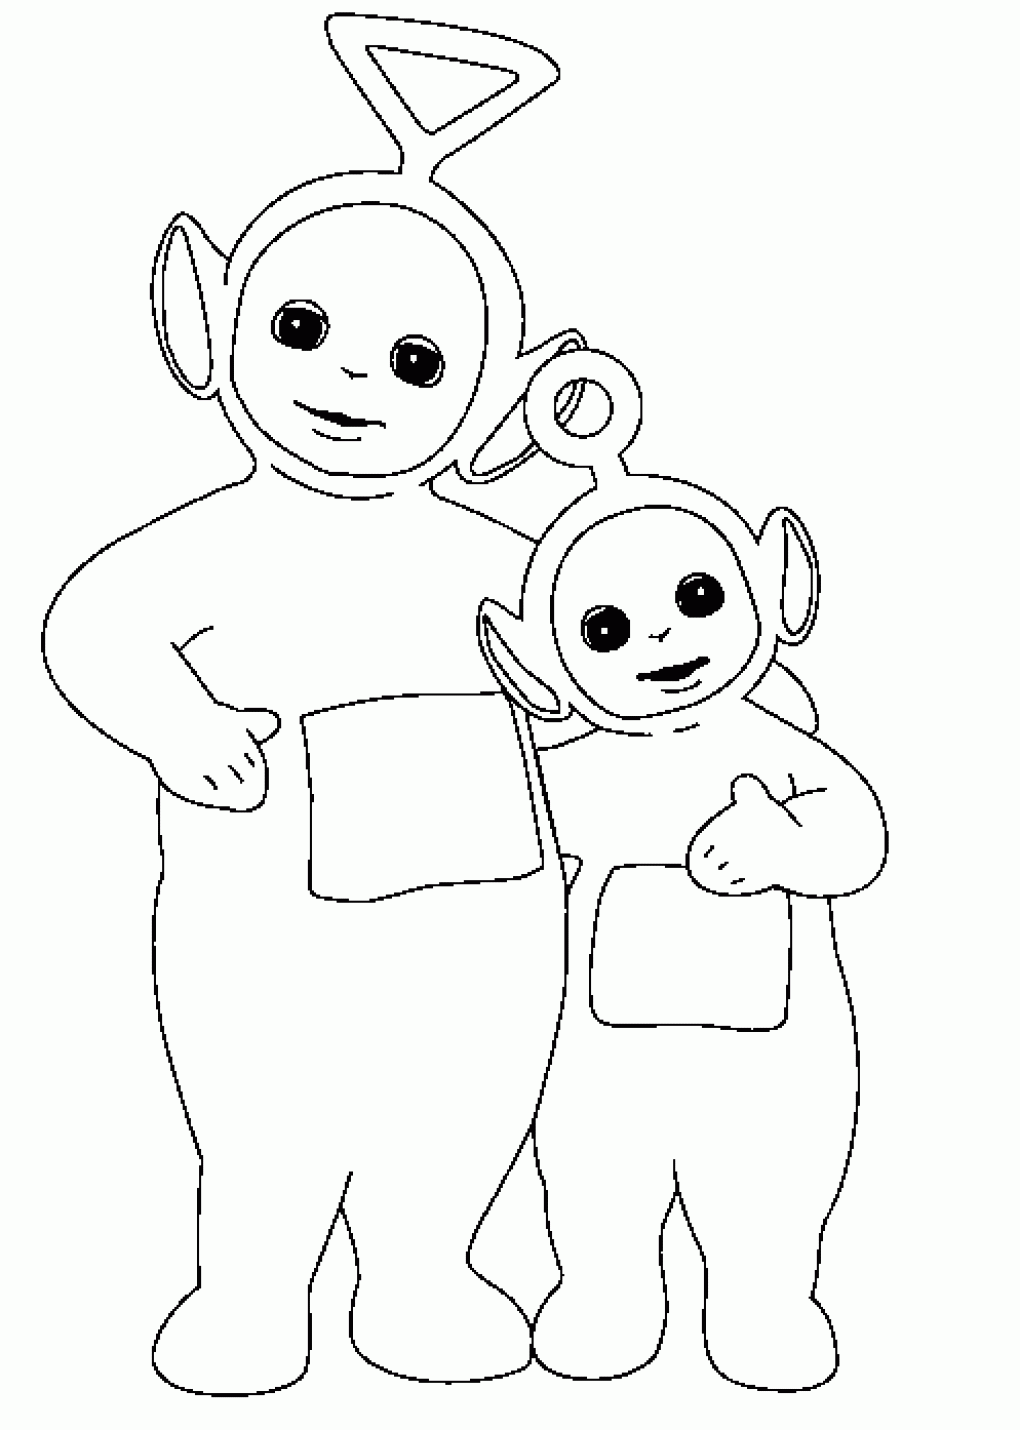 teletubbies colouring pages free printable teletubbies coloring pages for kids pages colouring teletubbies 